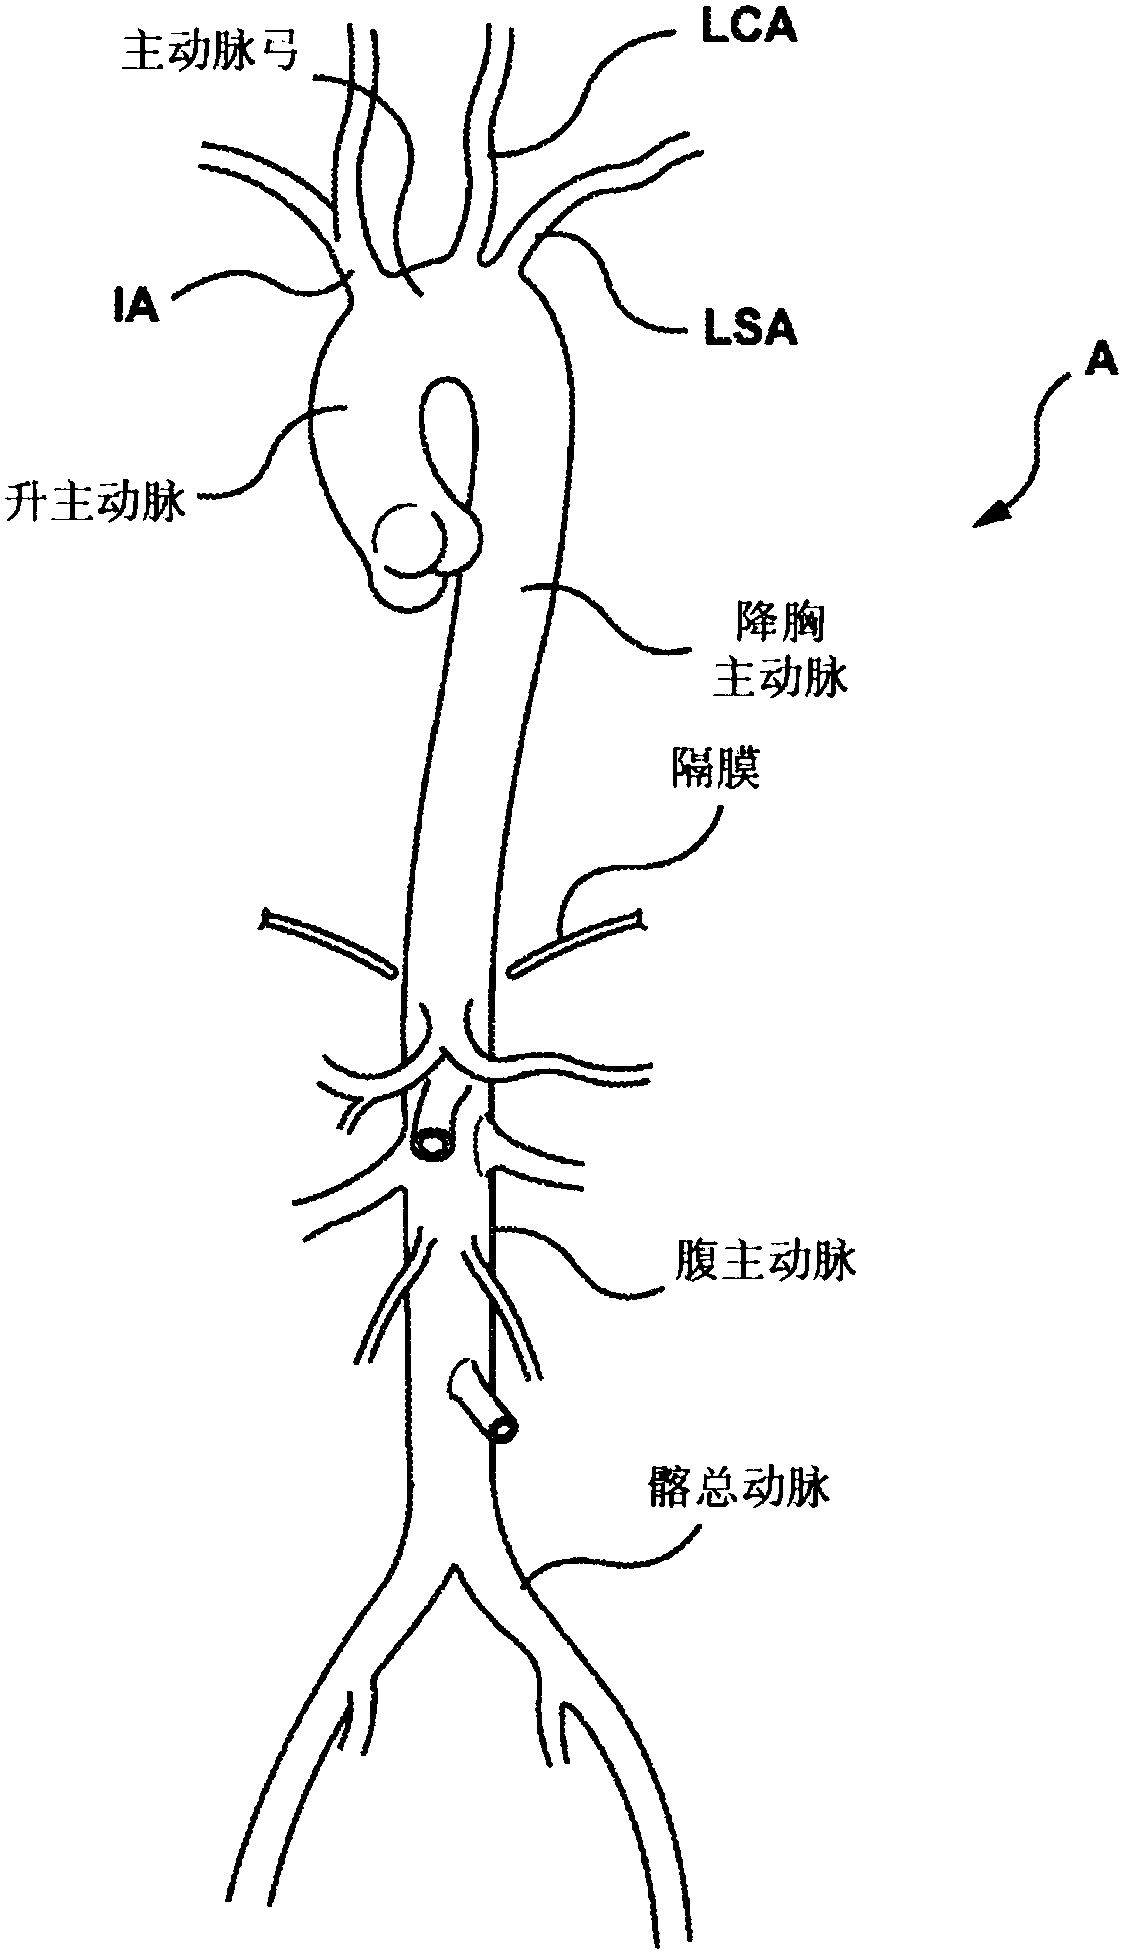 Endoluminal prosthetic devices having fluid-absorbable compositions for repair of a vascular tissue defect